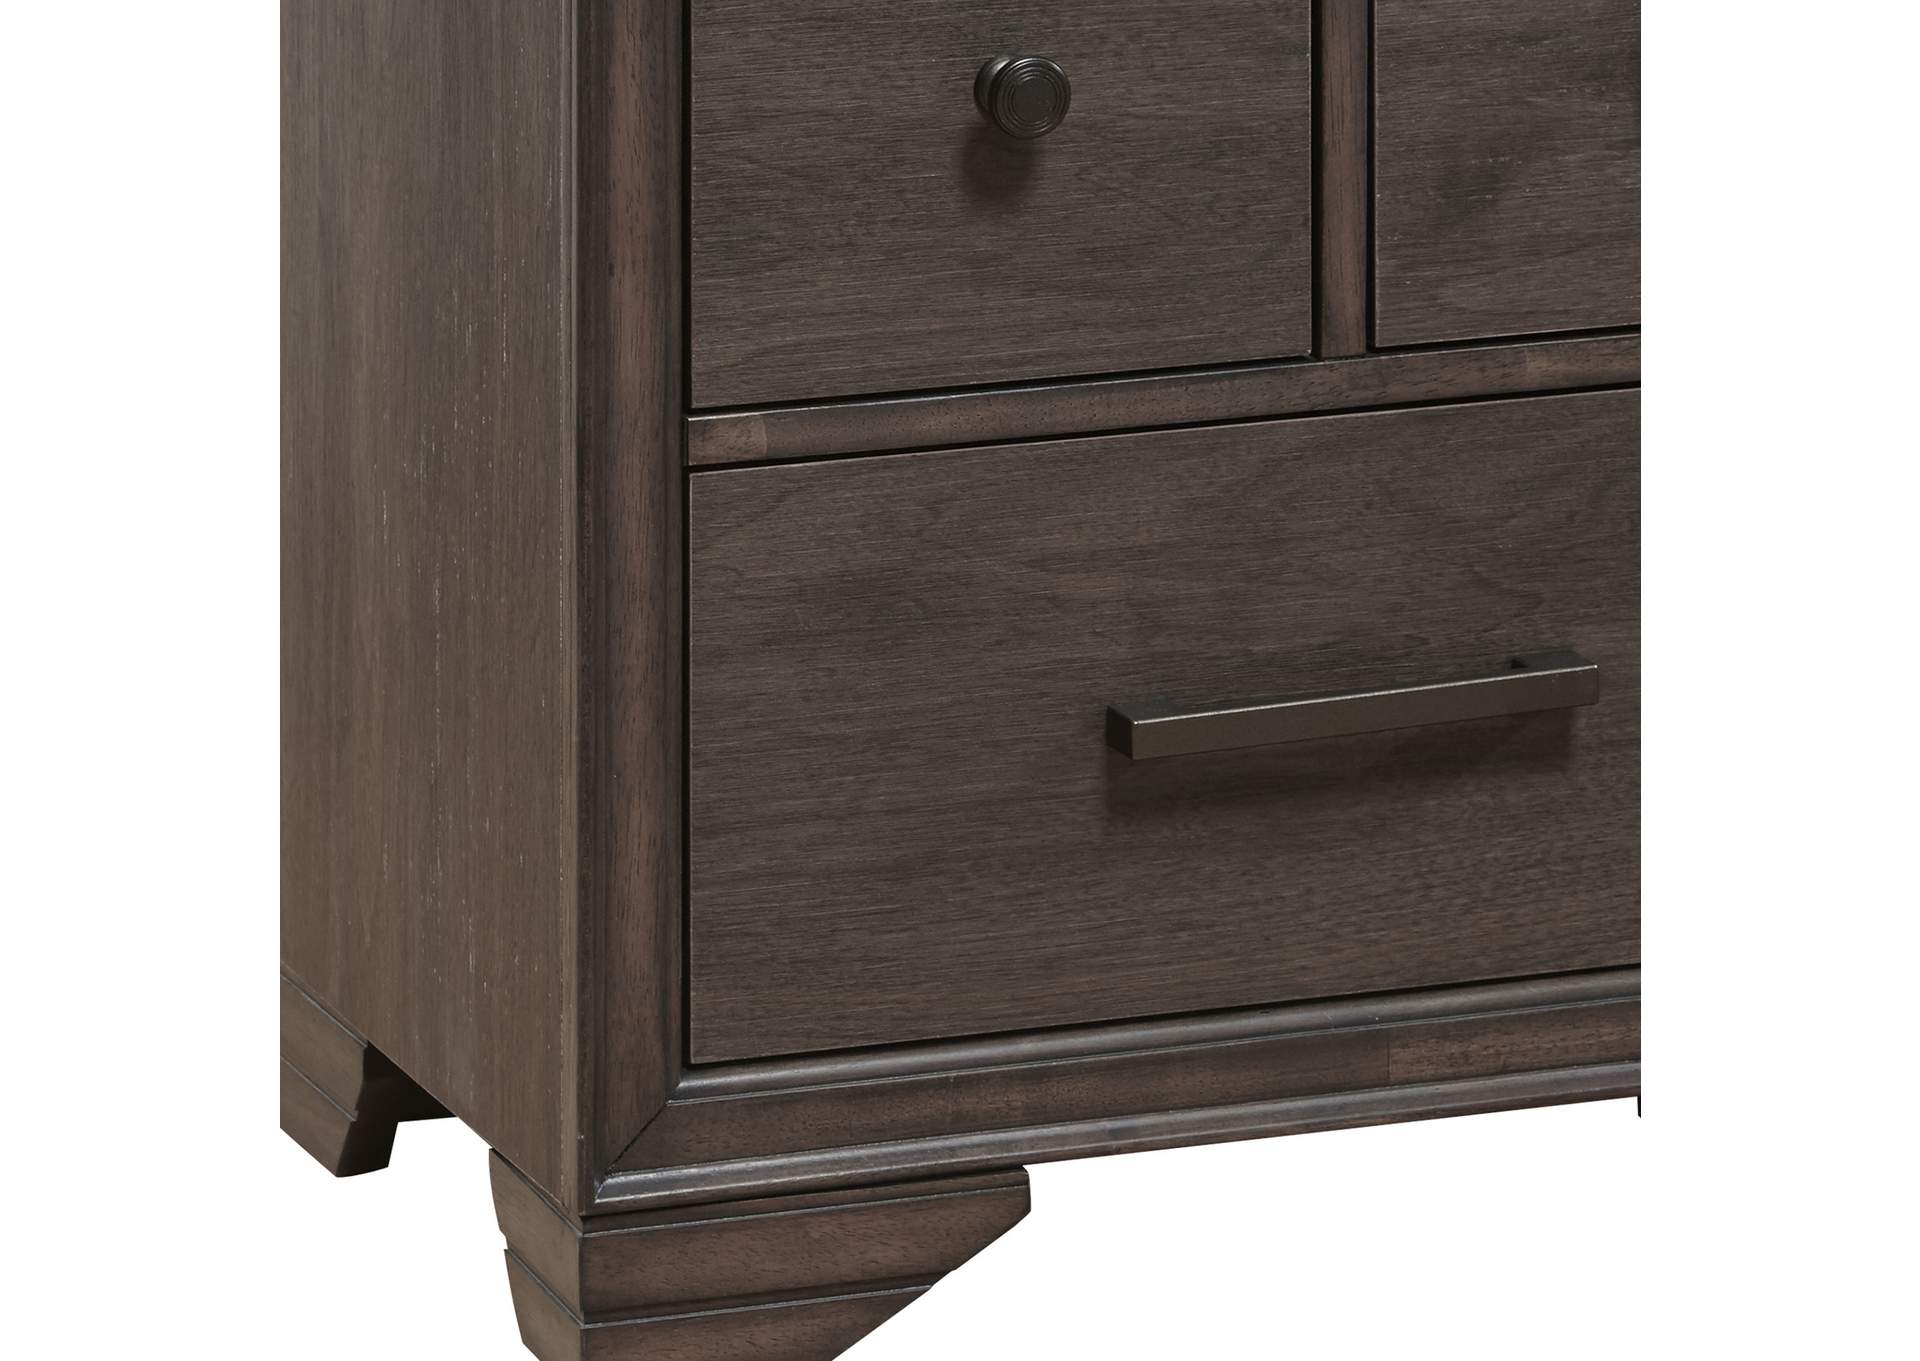 Three Drawer Youth Nightstand with USB in Brown,Pulaski Furniture